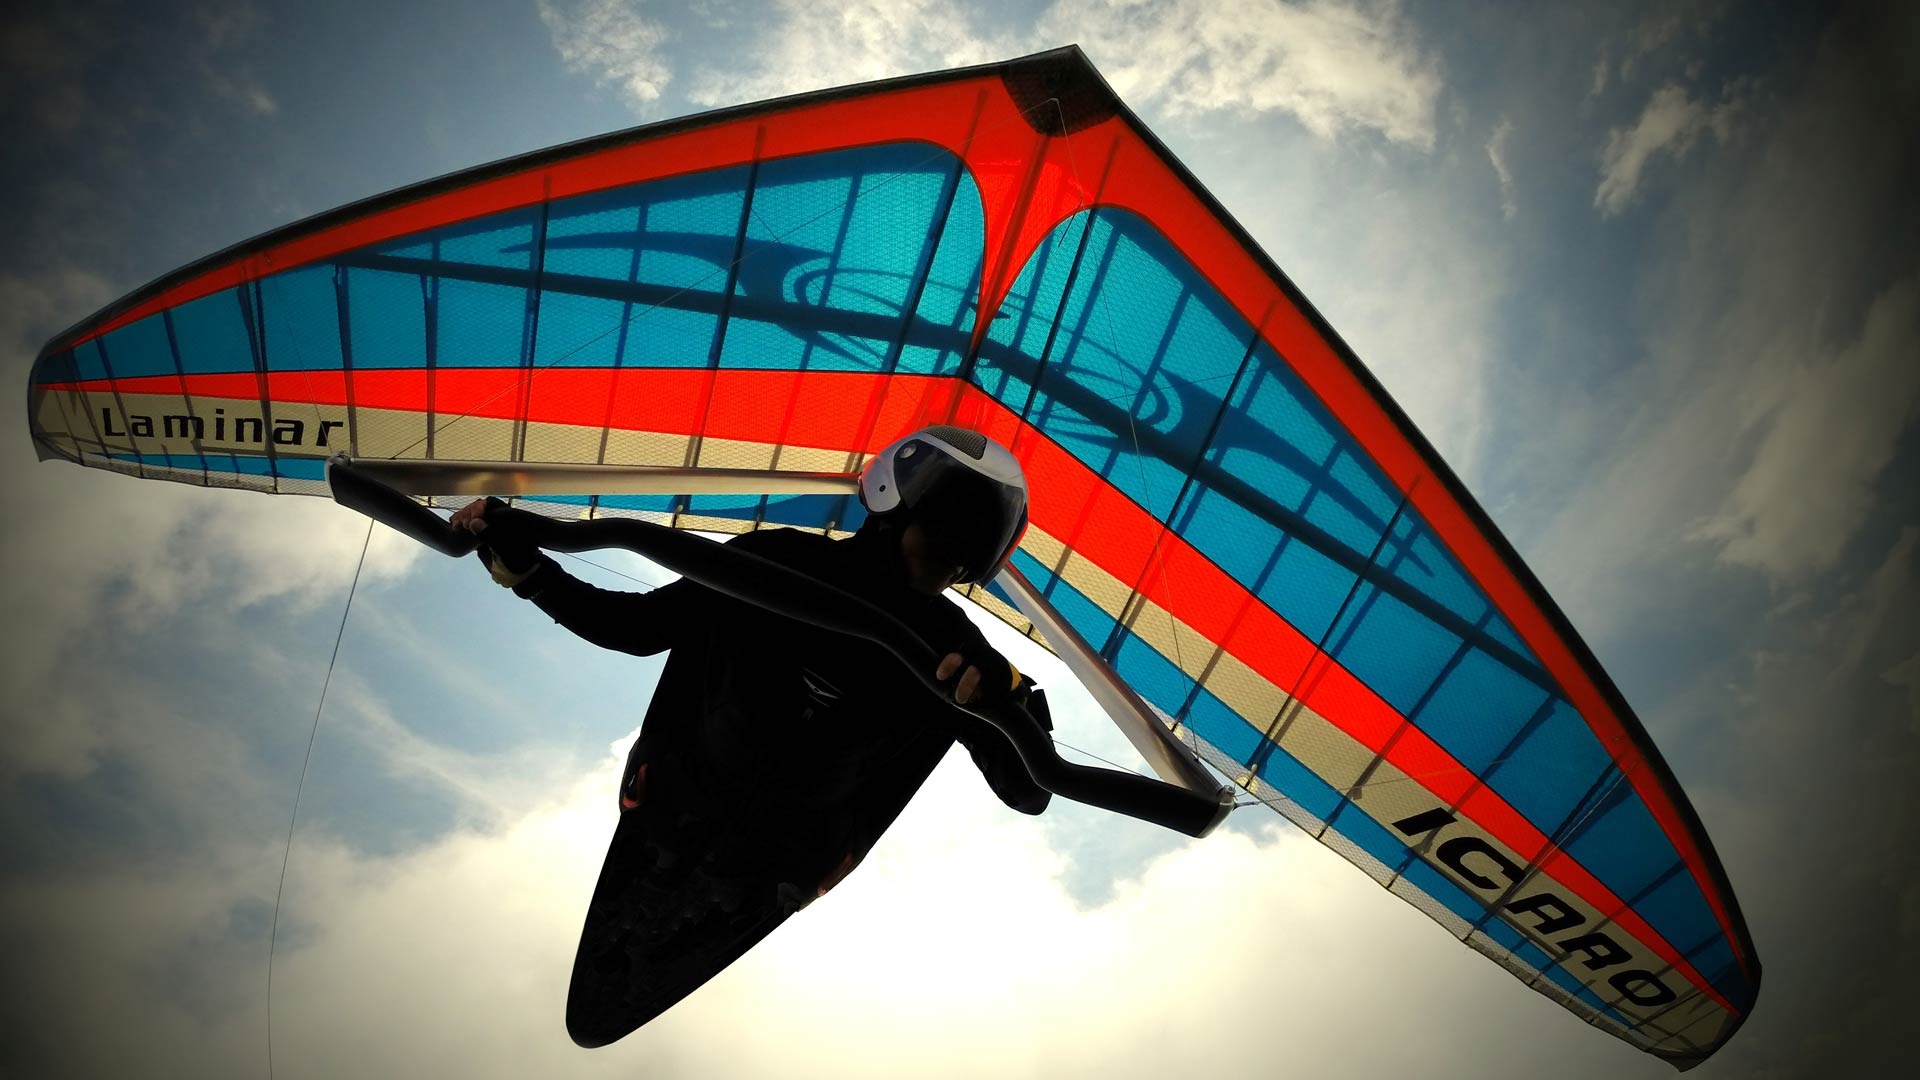 Gliding: Icaro Laminar foot-launched hang glider with a pilot in the pod. 1920x1080 Full HD Wallpaper.